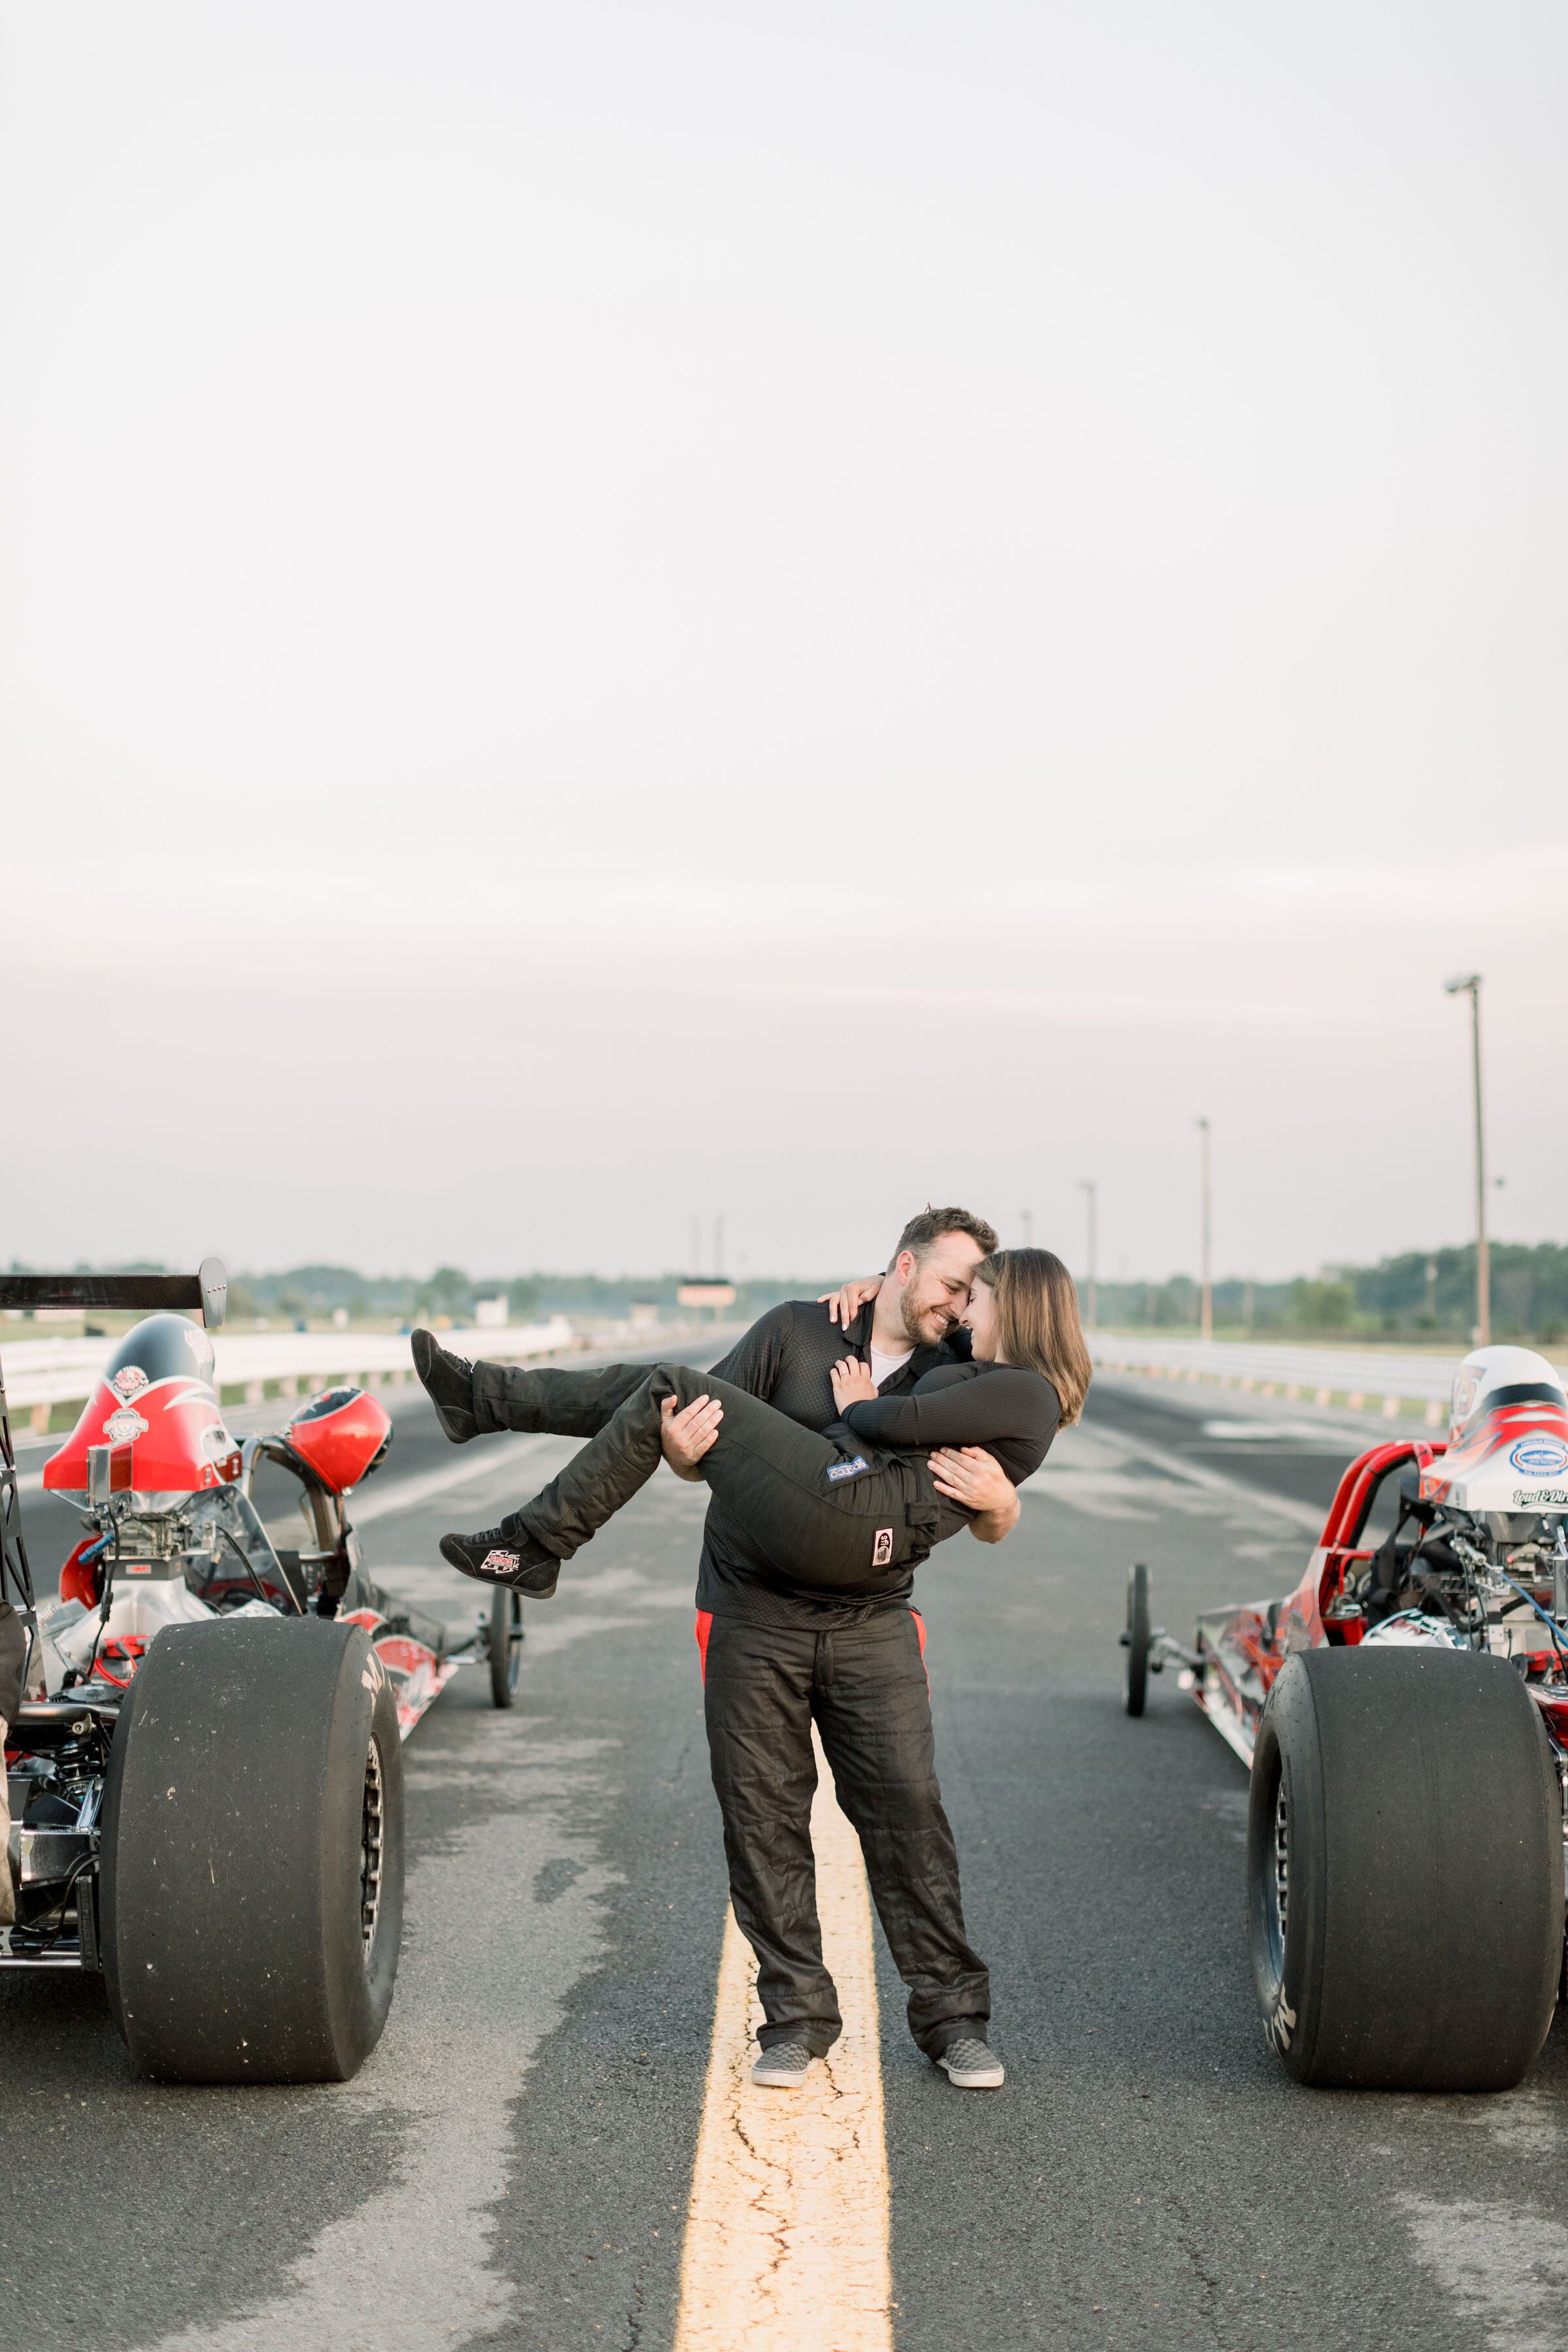  Unique engagement photos at a racetrack with racecar and couple in their racecar outfits in Ottawa, ON by Chelsea Morgan Photographer. best photographer in ottawa unique engagement photo ideas cars in engagement photos posing with cars racetrack loc